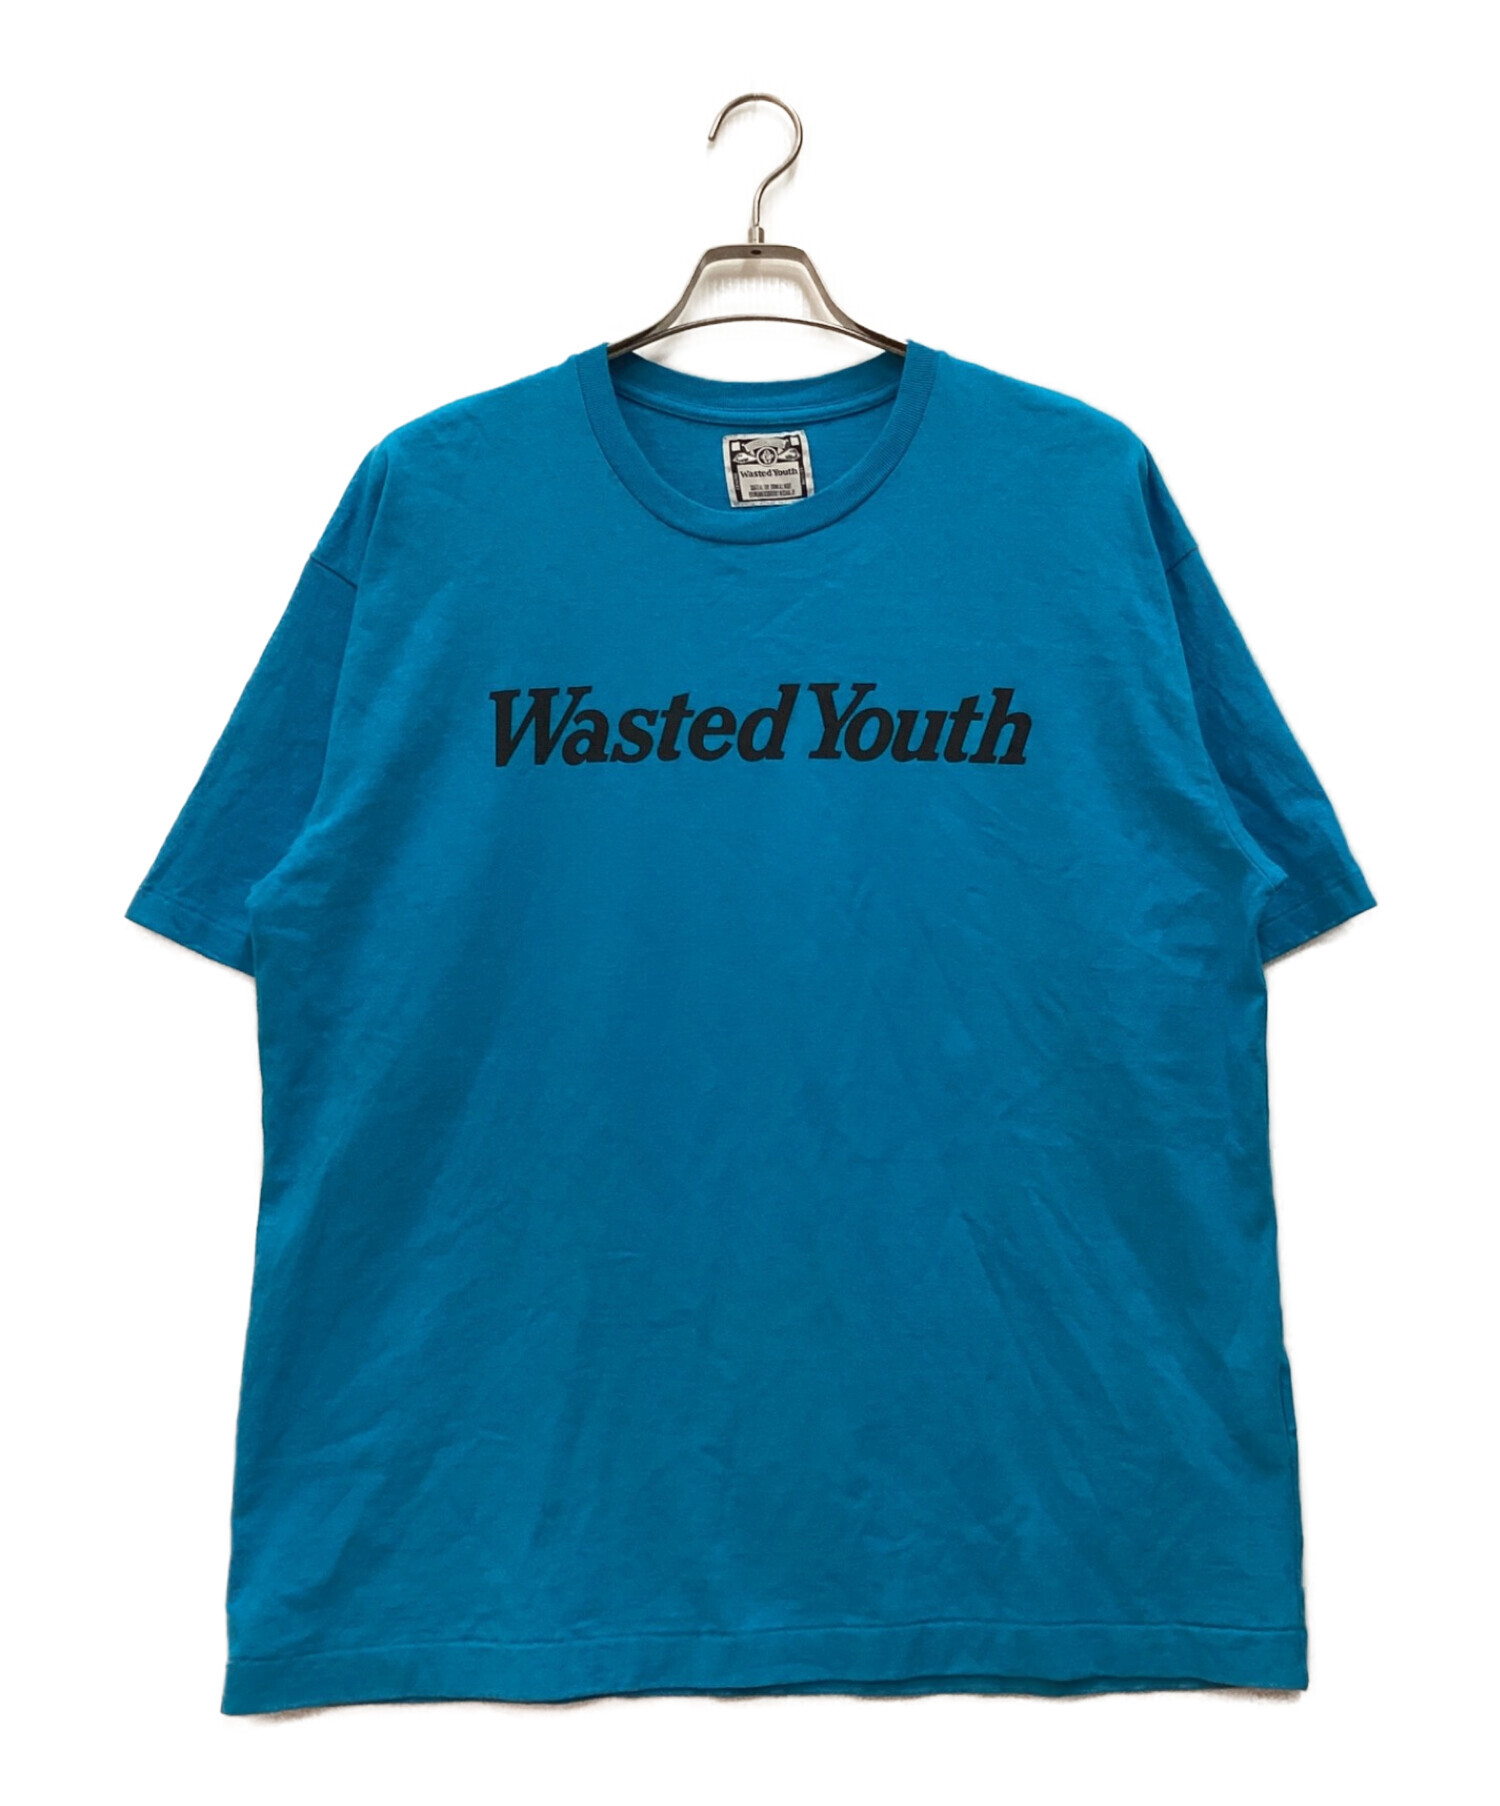 Wasted Youth T-SHIRT BLUE XLサイズ - Tシャツ/カットソー(半袖/袖なし)